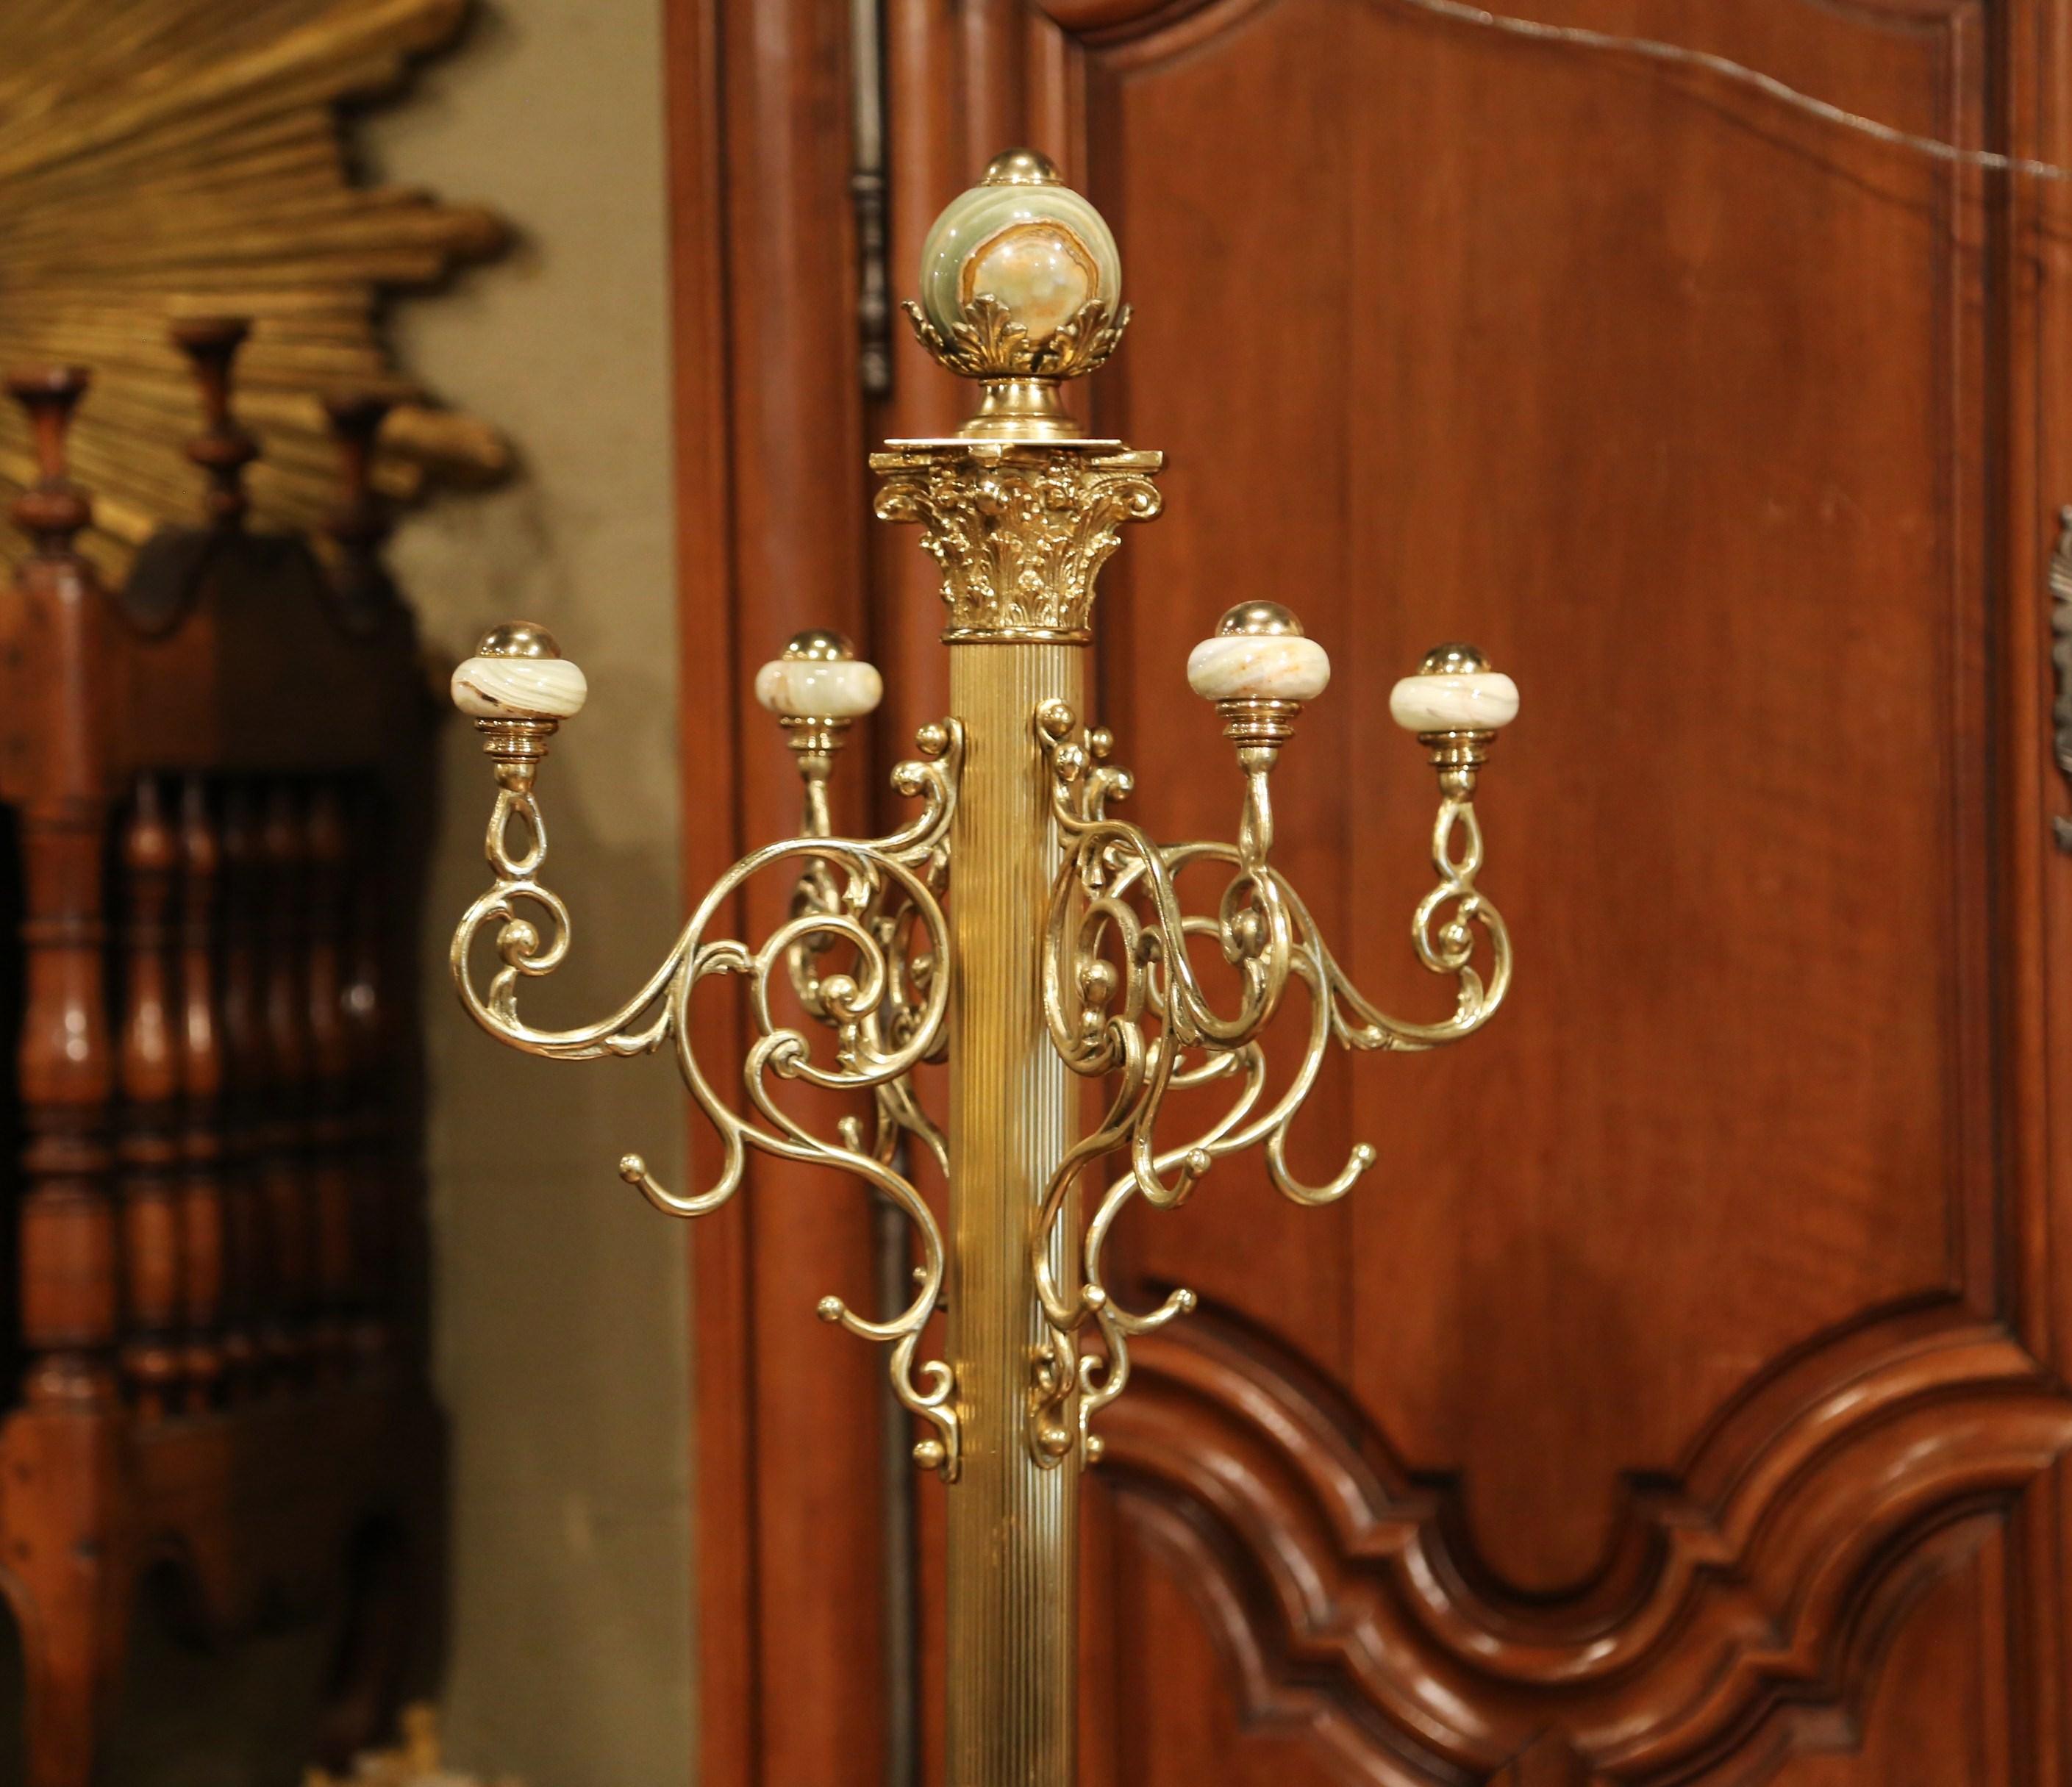 Add a touch of old French style to your home with this vintage, free standing coat rack and hat rack. This brass and marble stand was created in France, circa 1960, and would be the perfect piece to hold your clothing and accessories in the entryway